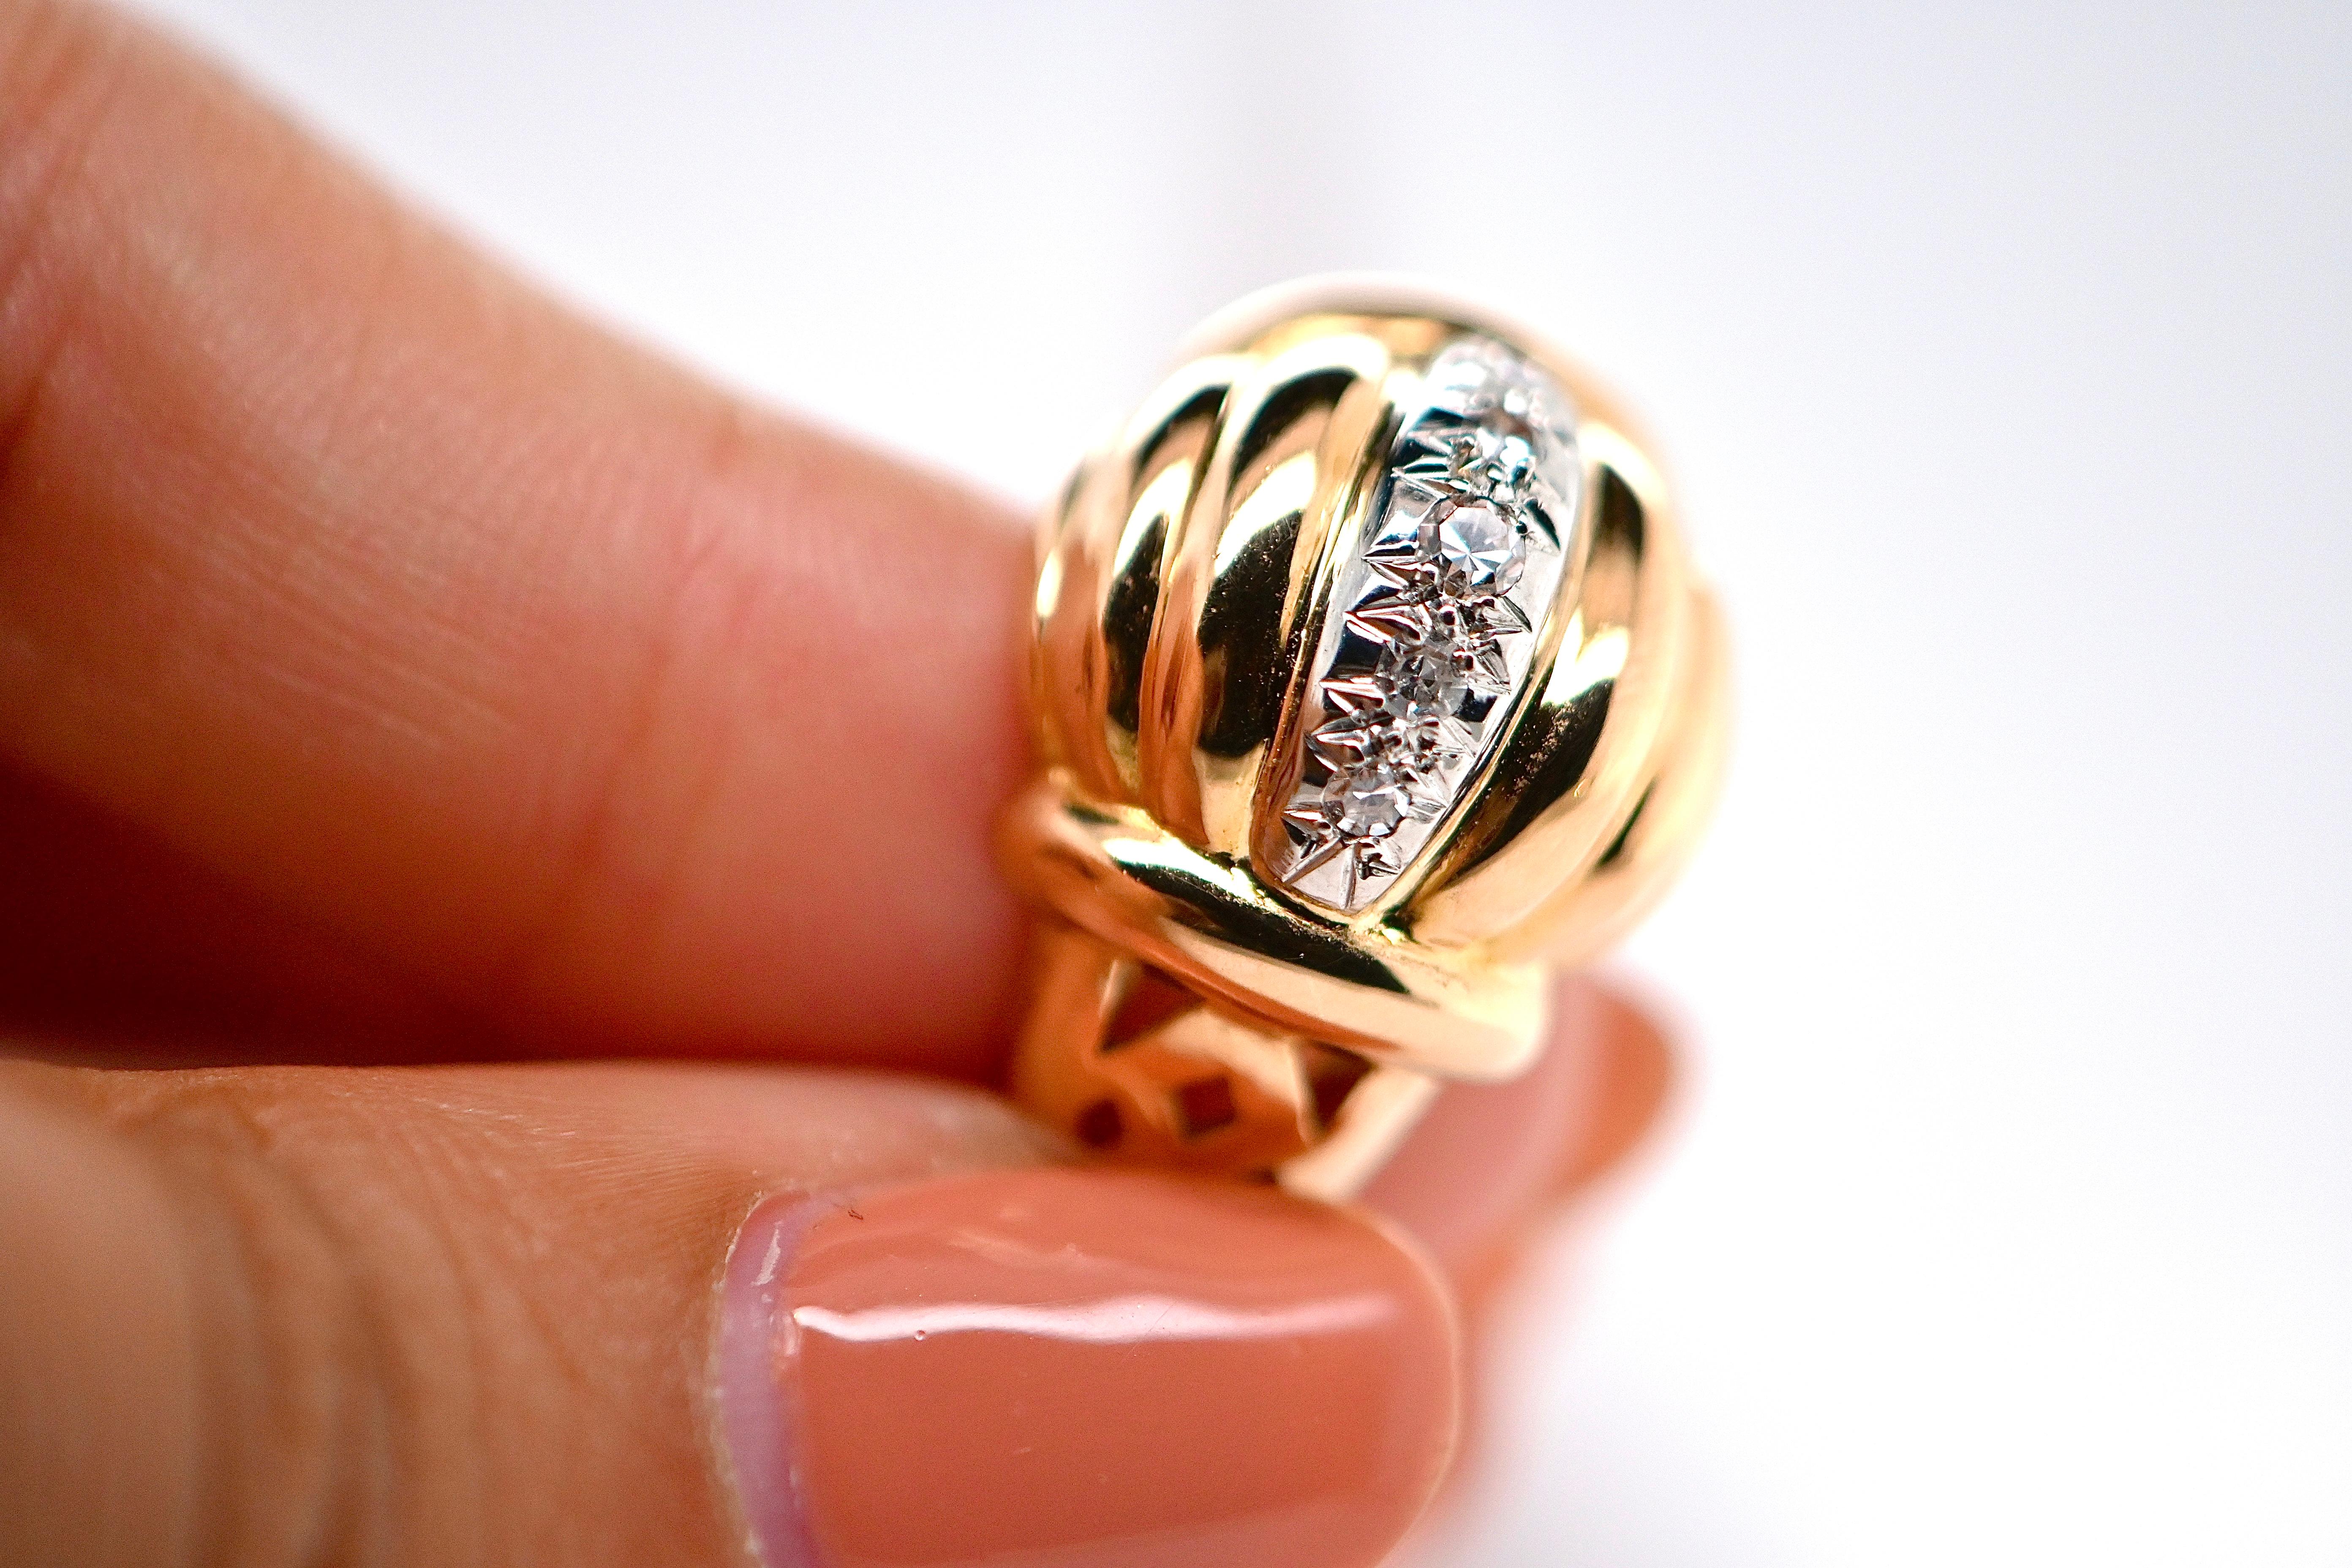 Discover this magnificent dome ring in 18-carat gold, a true masterpiece of Art Deco style, topped with five sparkling diamonds carefully set. This exceptional piece combines elegance and sophistication, captivating the eye with its delicate details